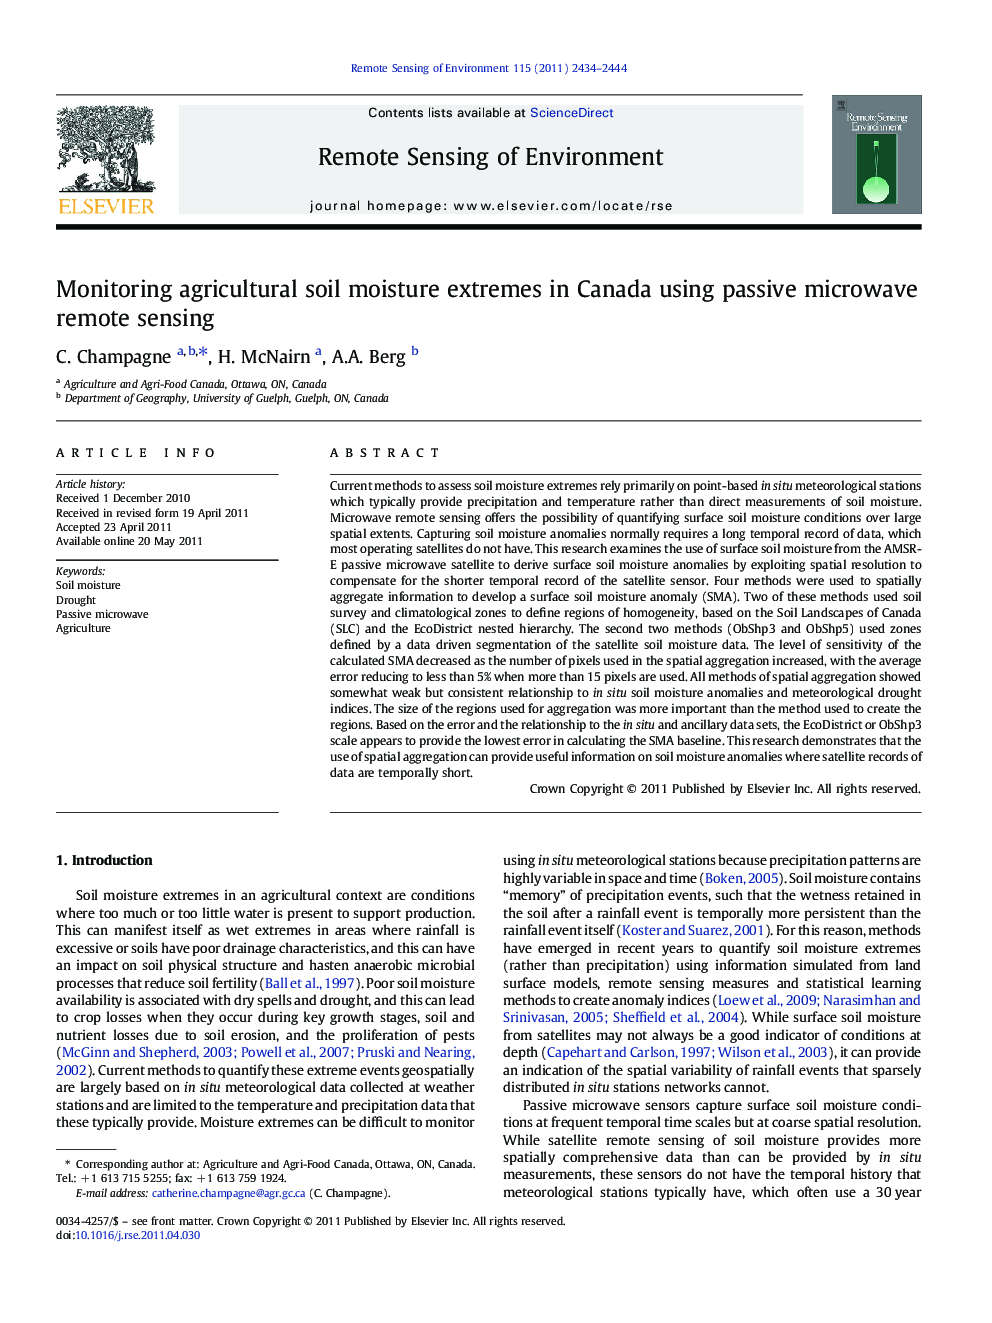 Monitoring agricultural soil moisture extremes in Canada using passive microwave remote sensing